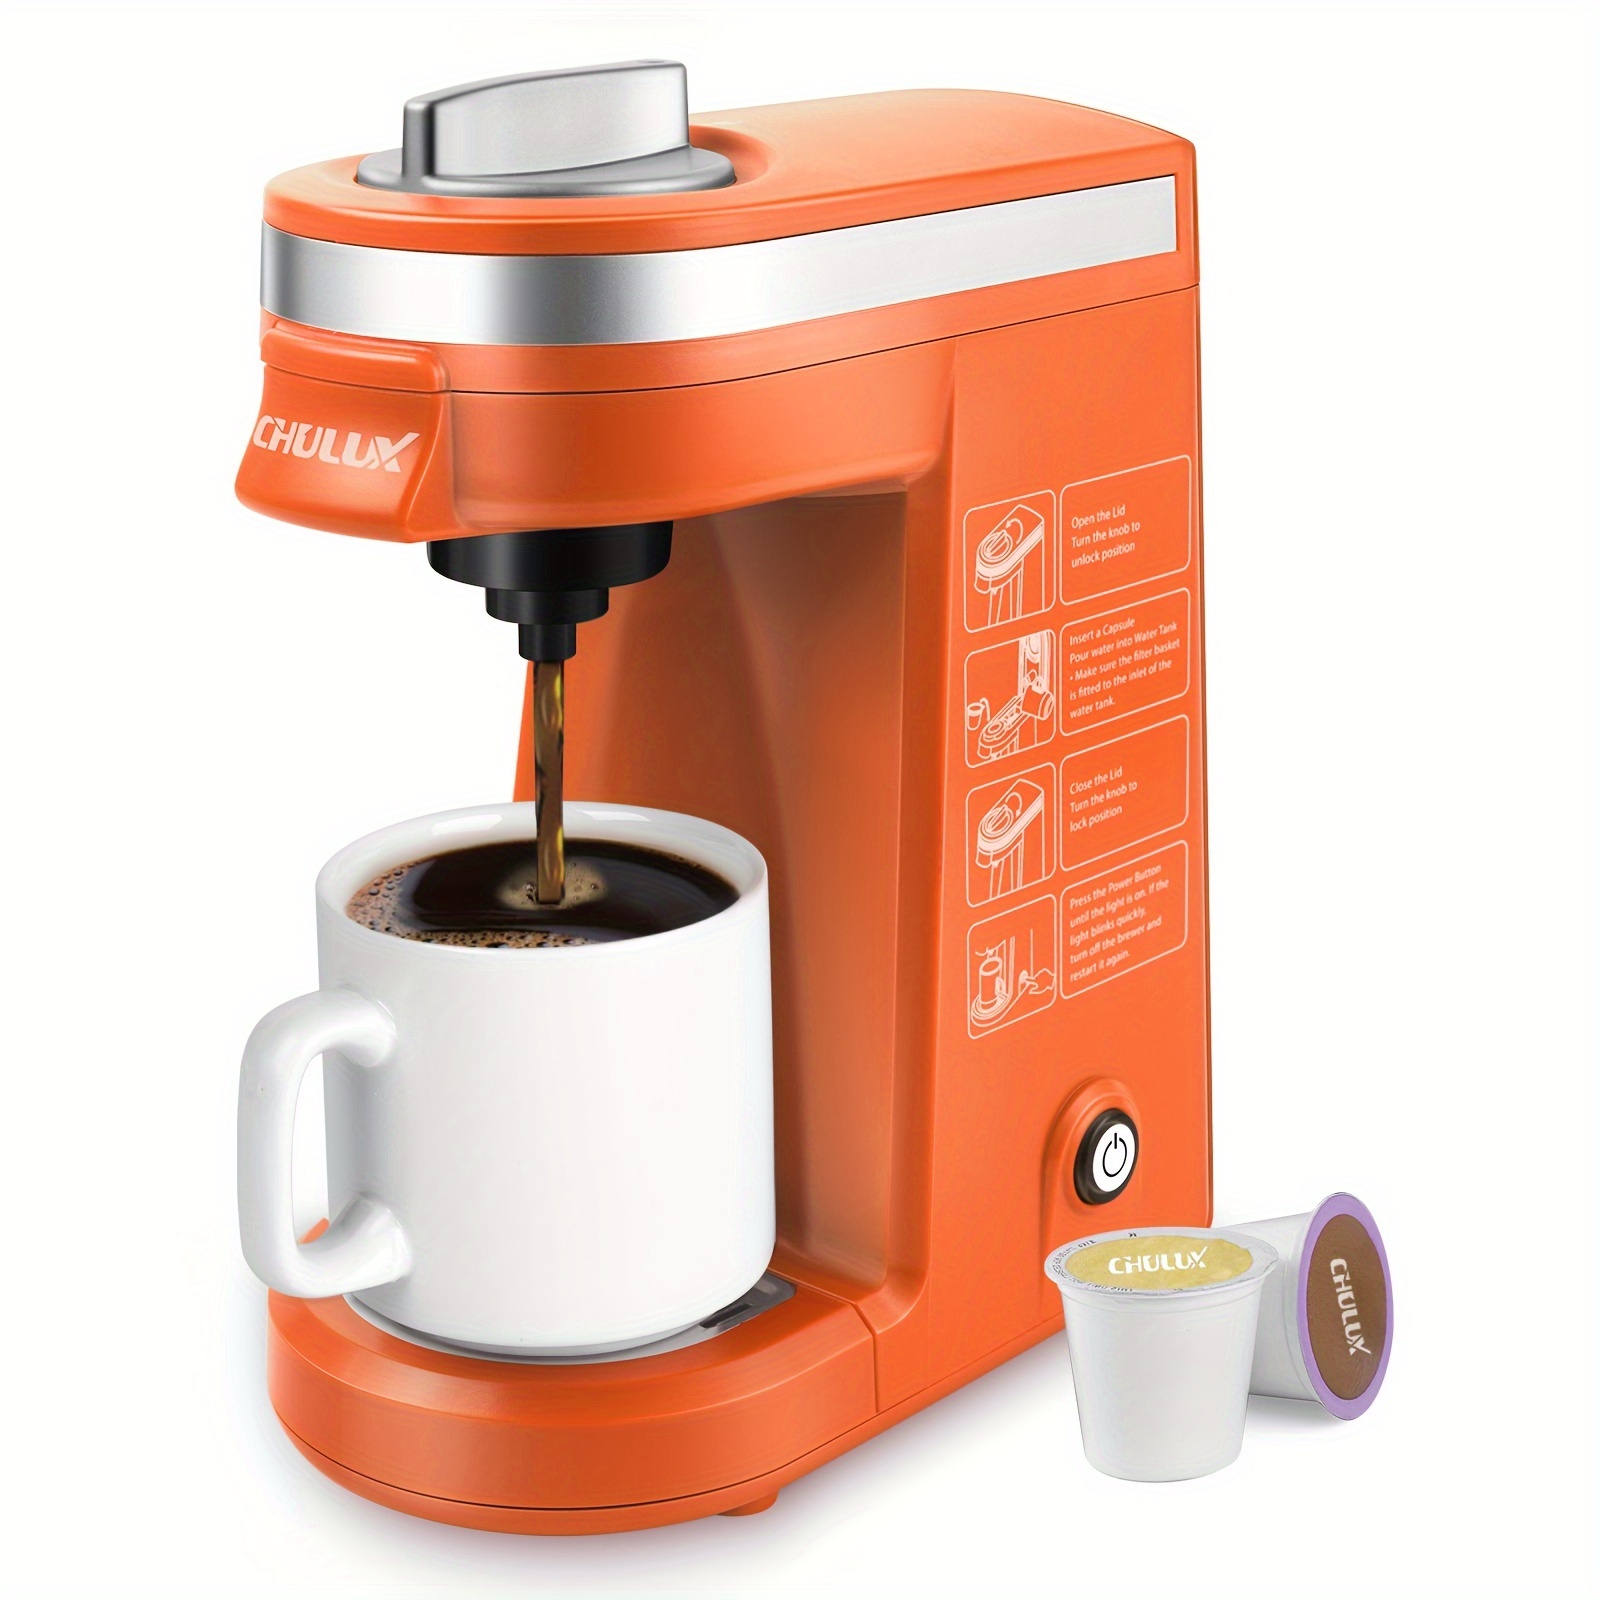 

1pc Chulux Classic Matte Single-serve Coffee Maker - K-cup, Tea, And Ground Coffee With 12oz Water Tank, Reusable Filter, And Fully Automatic Operation - 800w, 120v, Us Plug, Orange